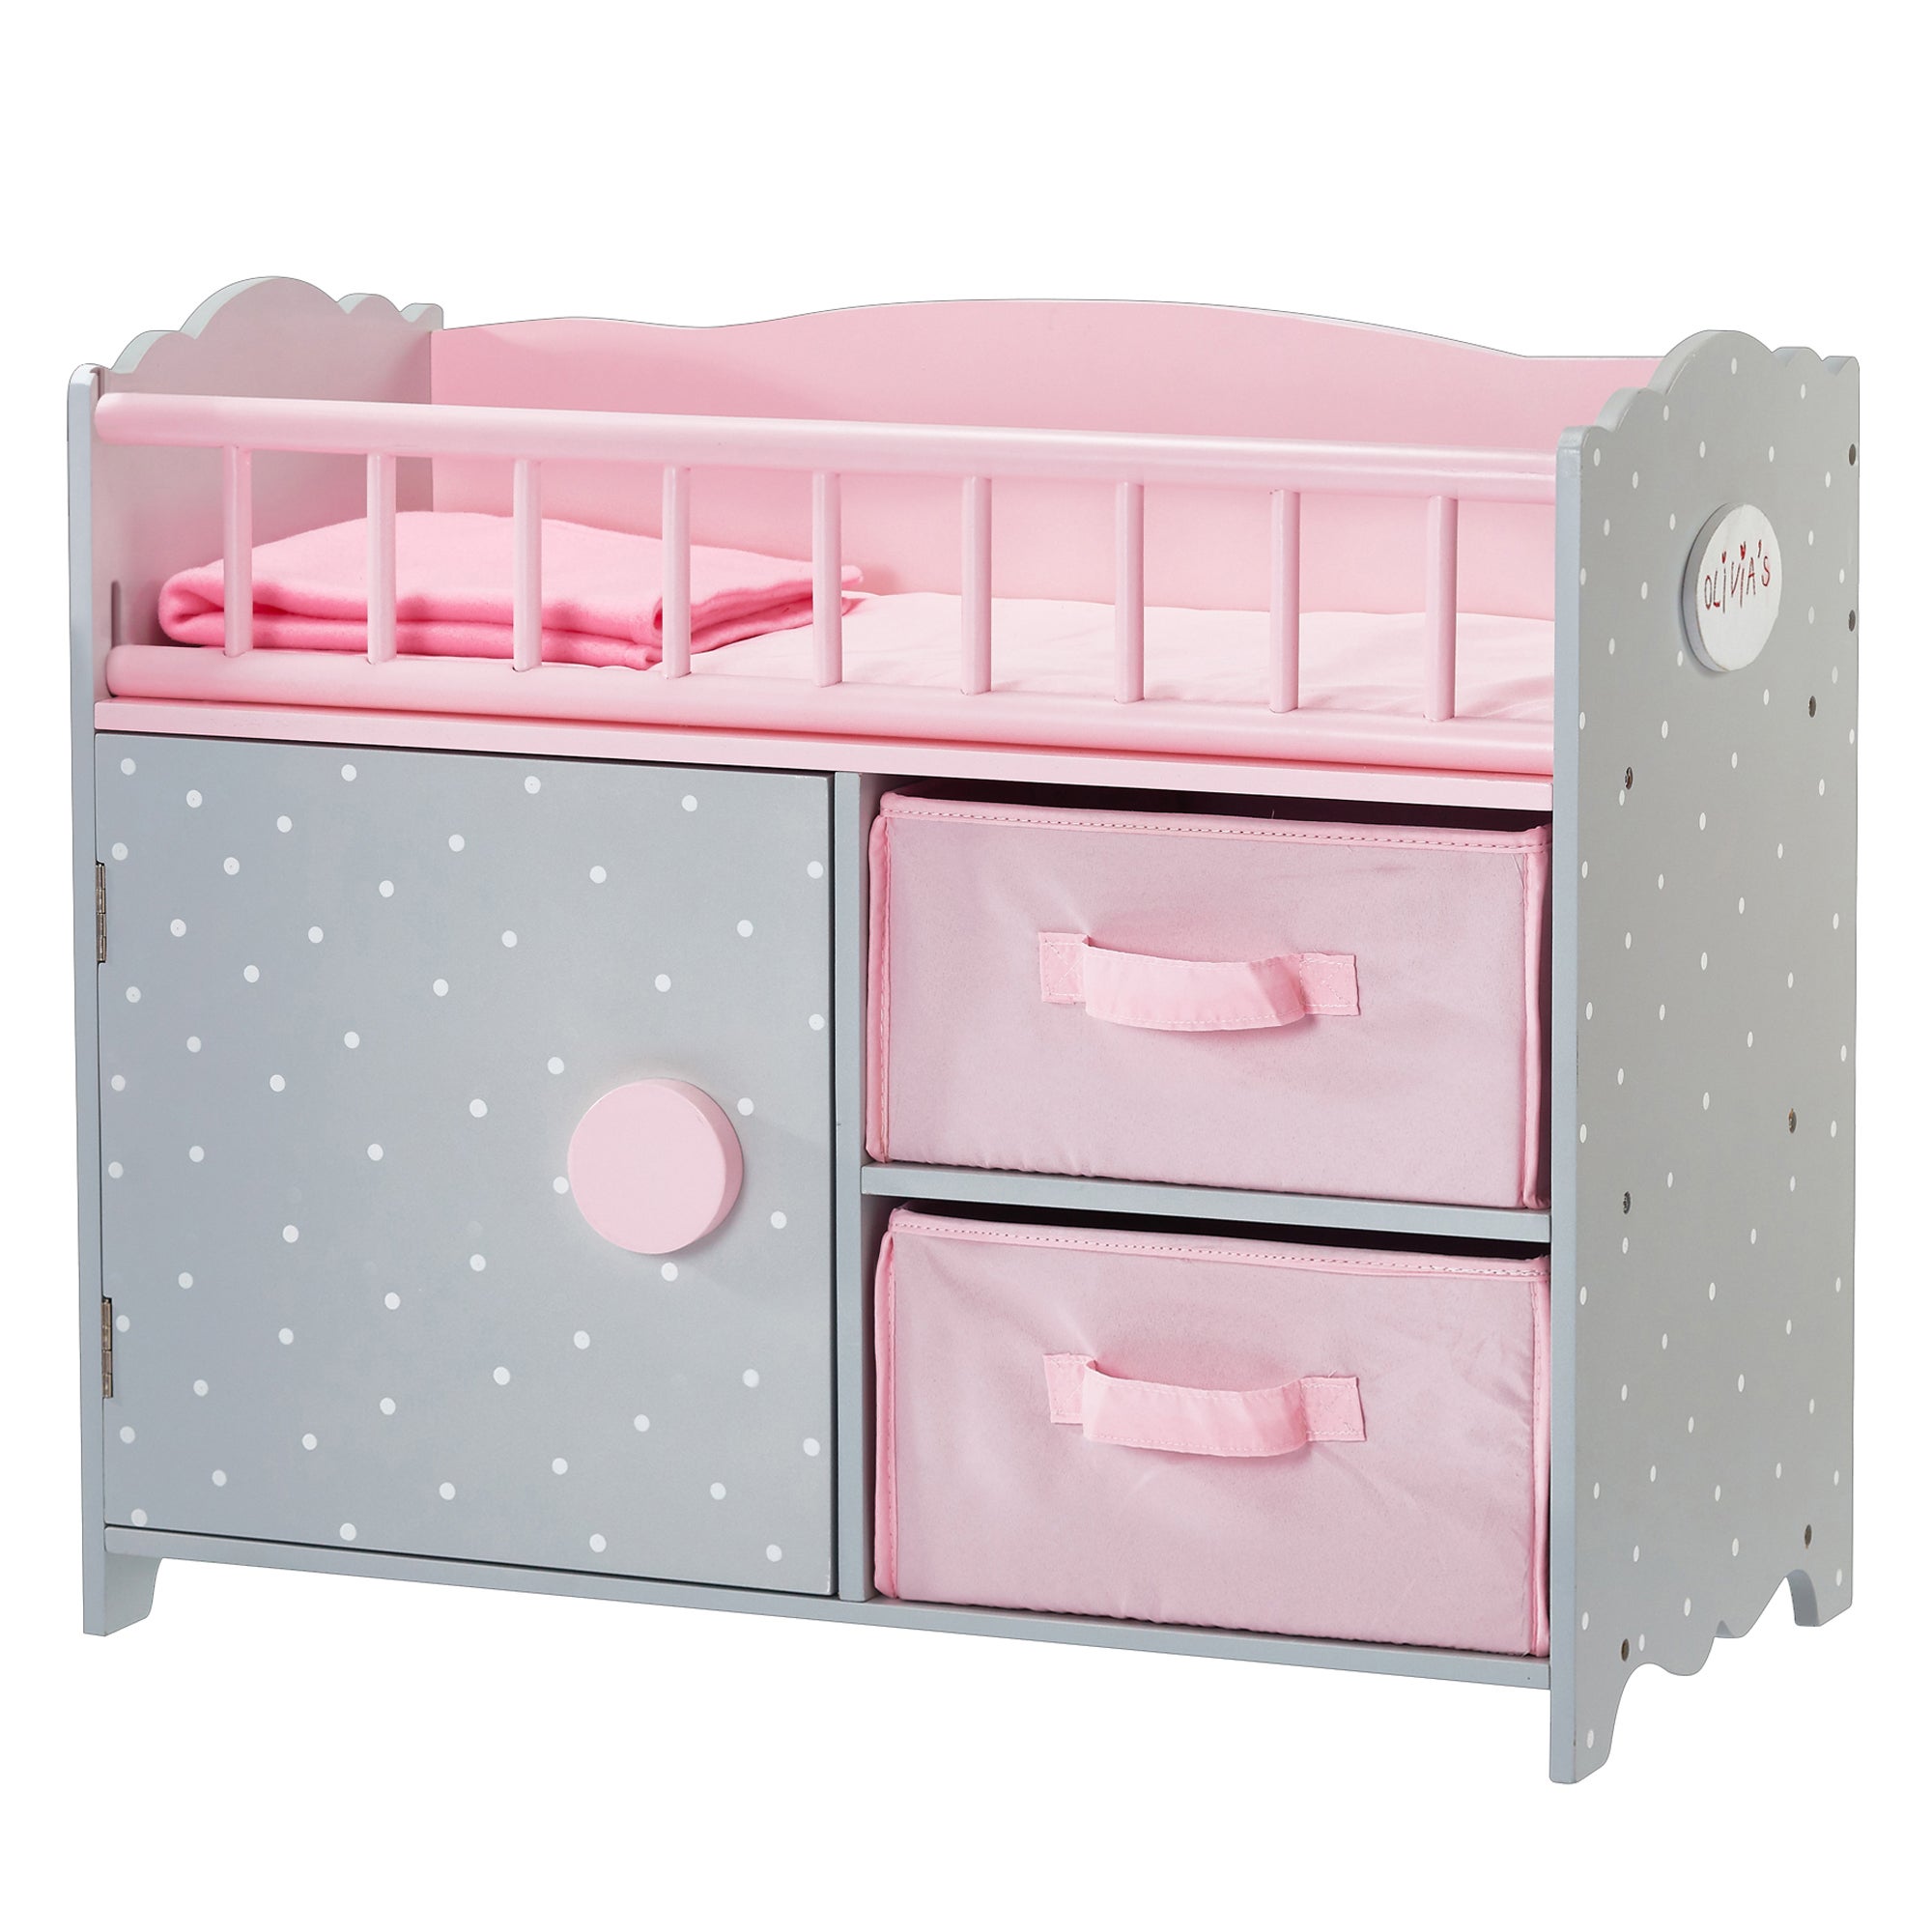 Teamson Kids - Polka Dots Princess Baby Doll Crib with Cabinet and Cubby